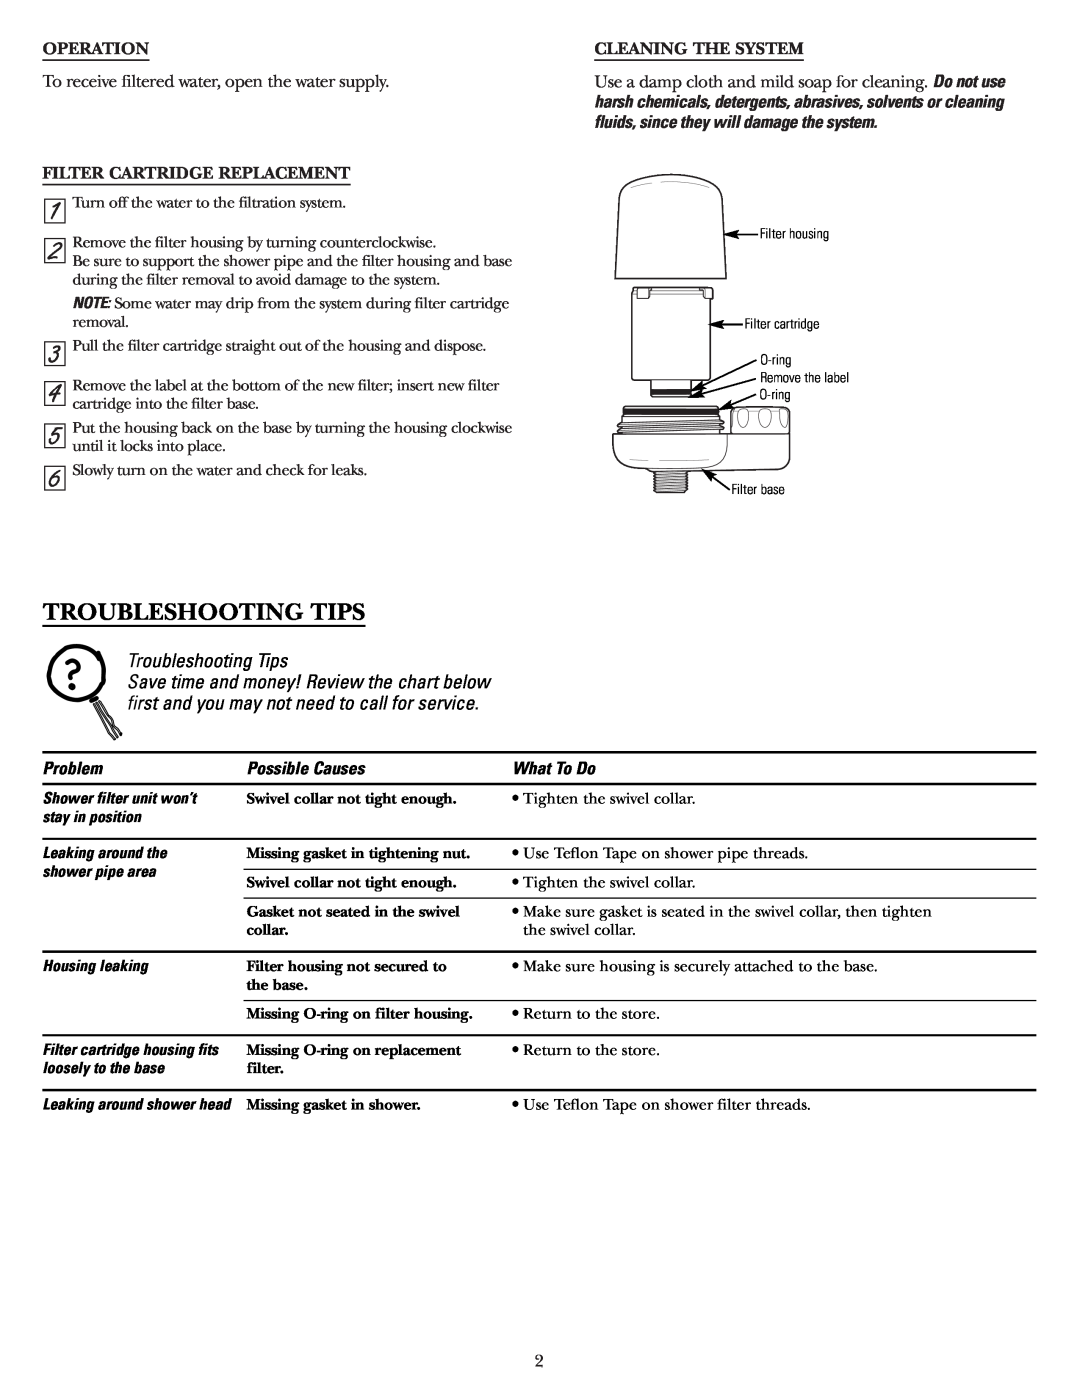 GE GXSM01HWW Troubleshooting Tips, Operation, To receive filtered water, open the water supply, Cleaning The System 